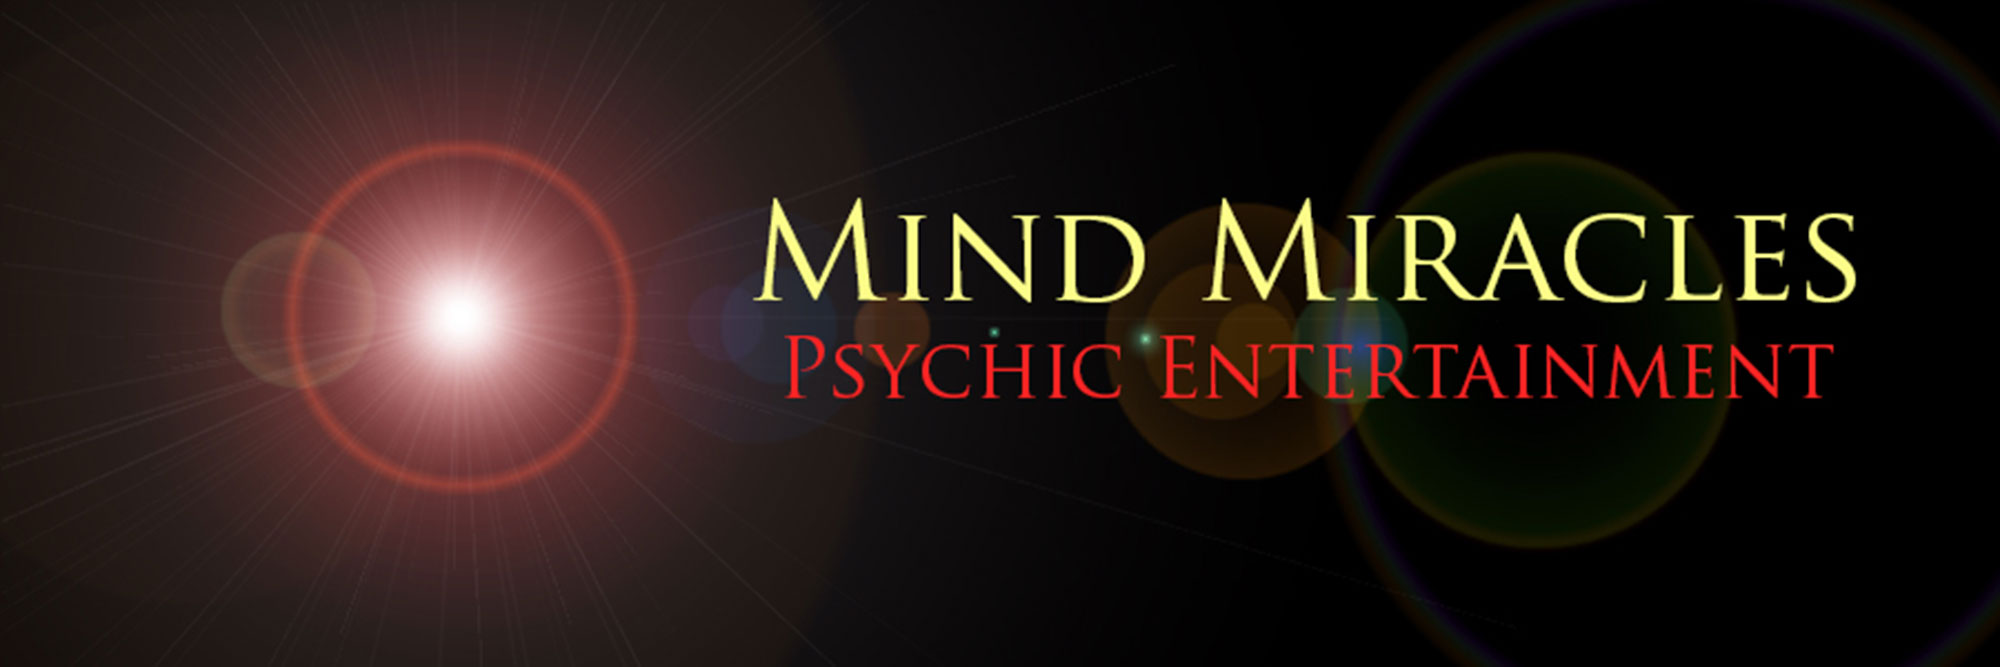 mind miracles